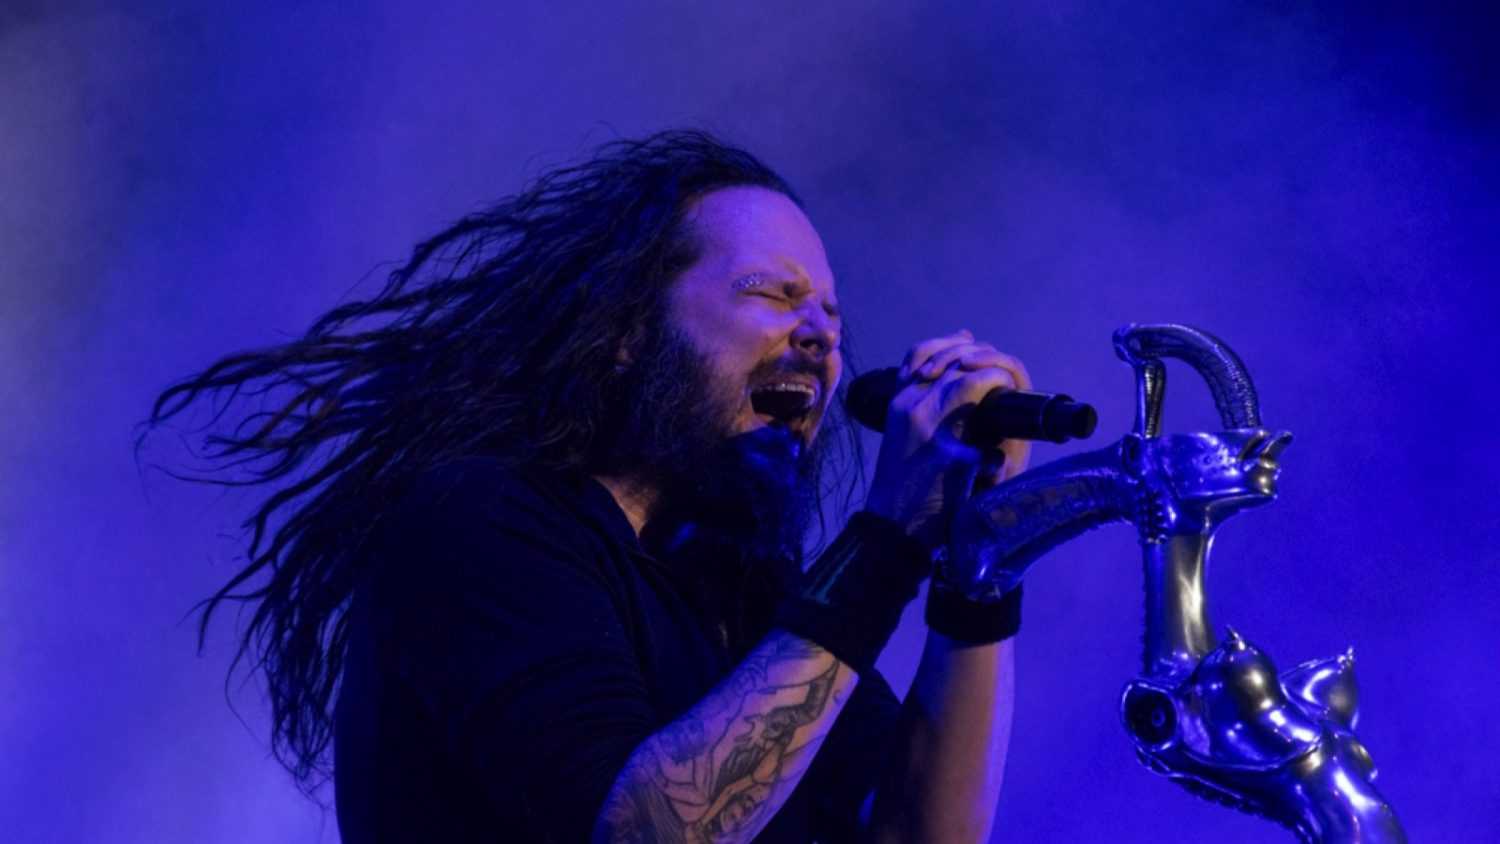 MOUNTAIN VIEW, CA - JULY 29, 2016: Korn in concert at the Shoreline Amphitheater in Mountain View, CA